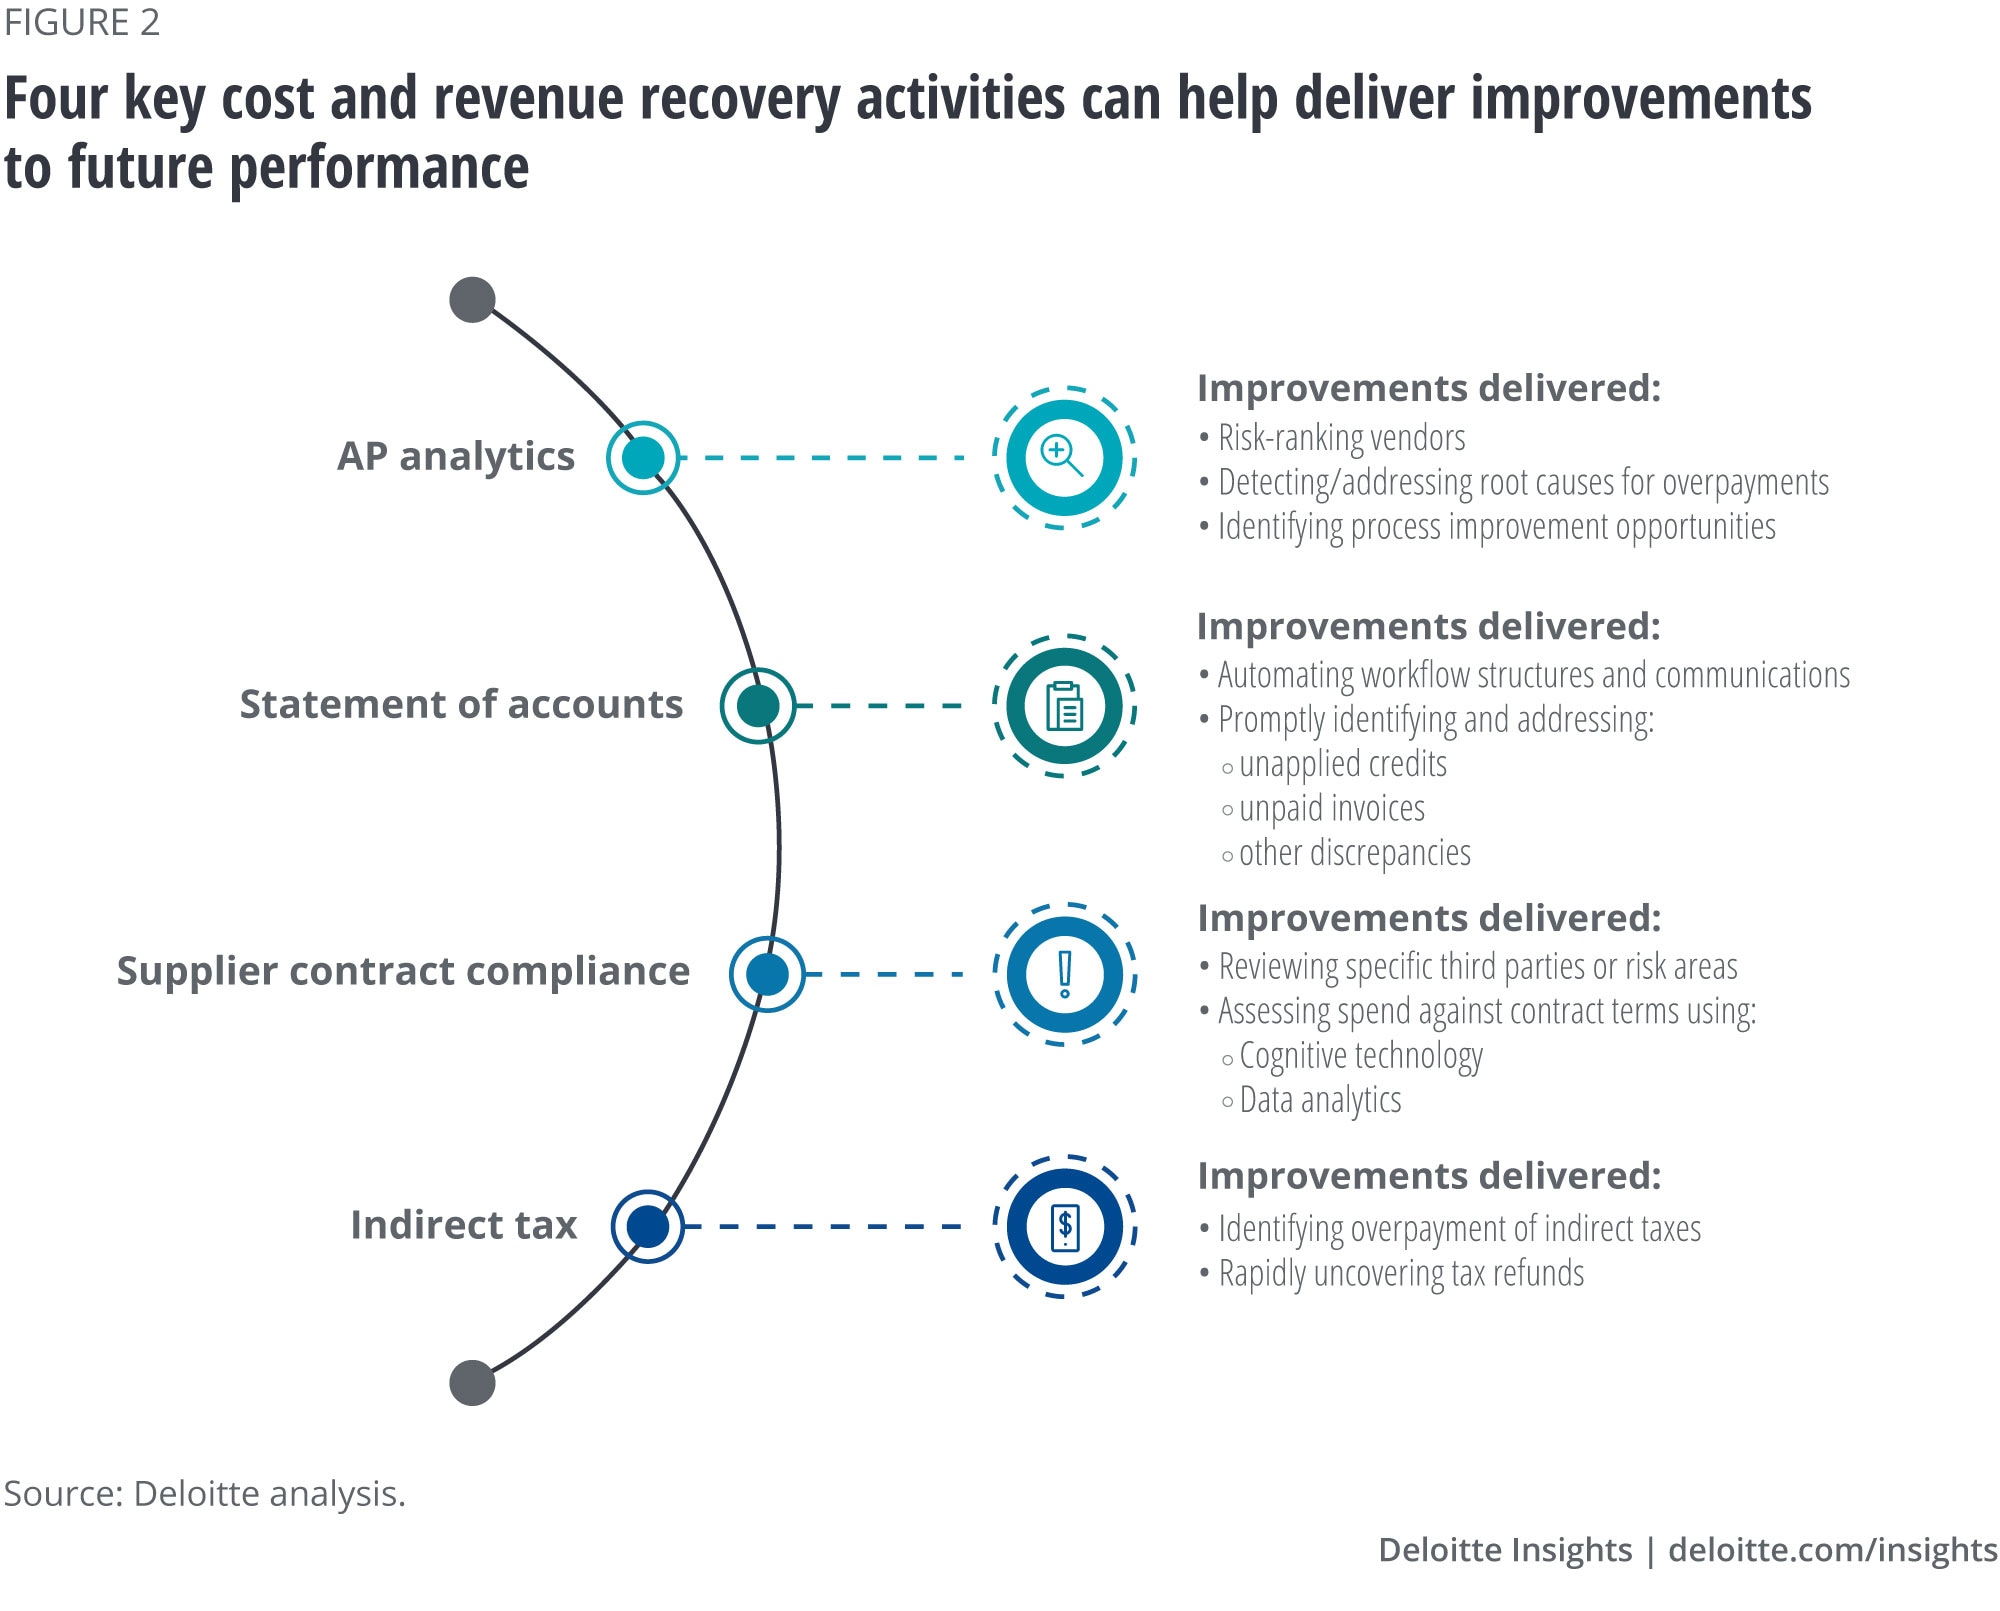 Four key cost and revenue recovery activities can help drive improvements to future performance